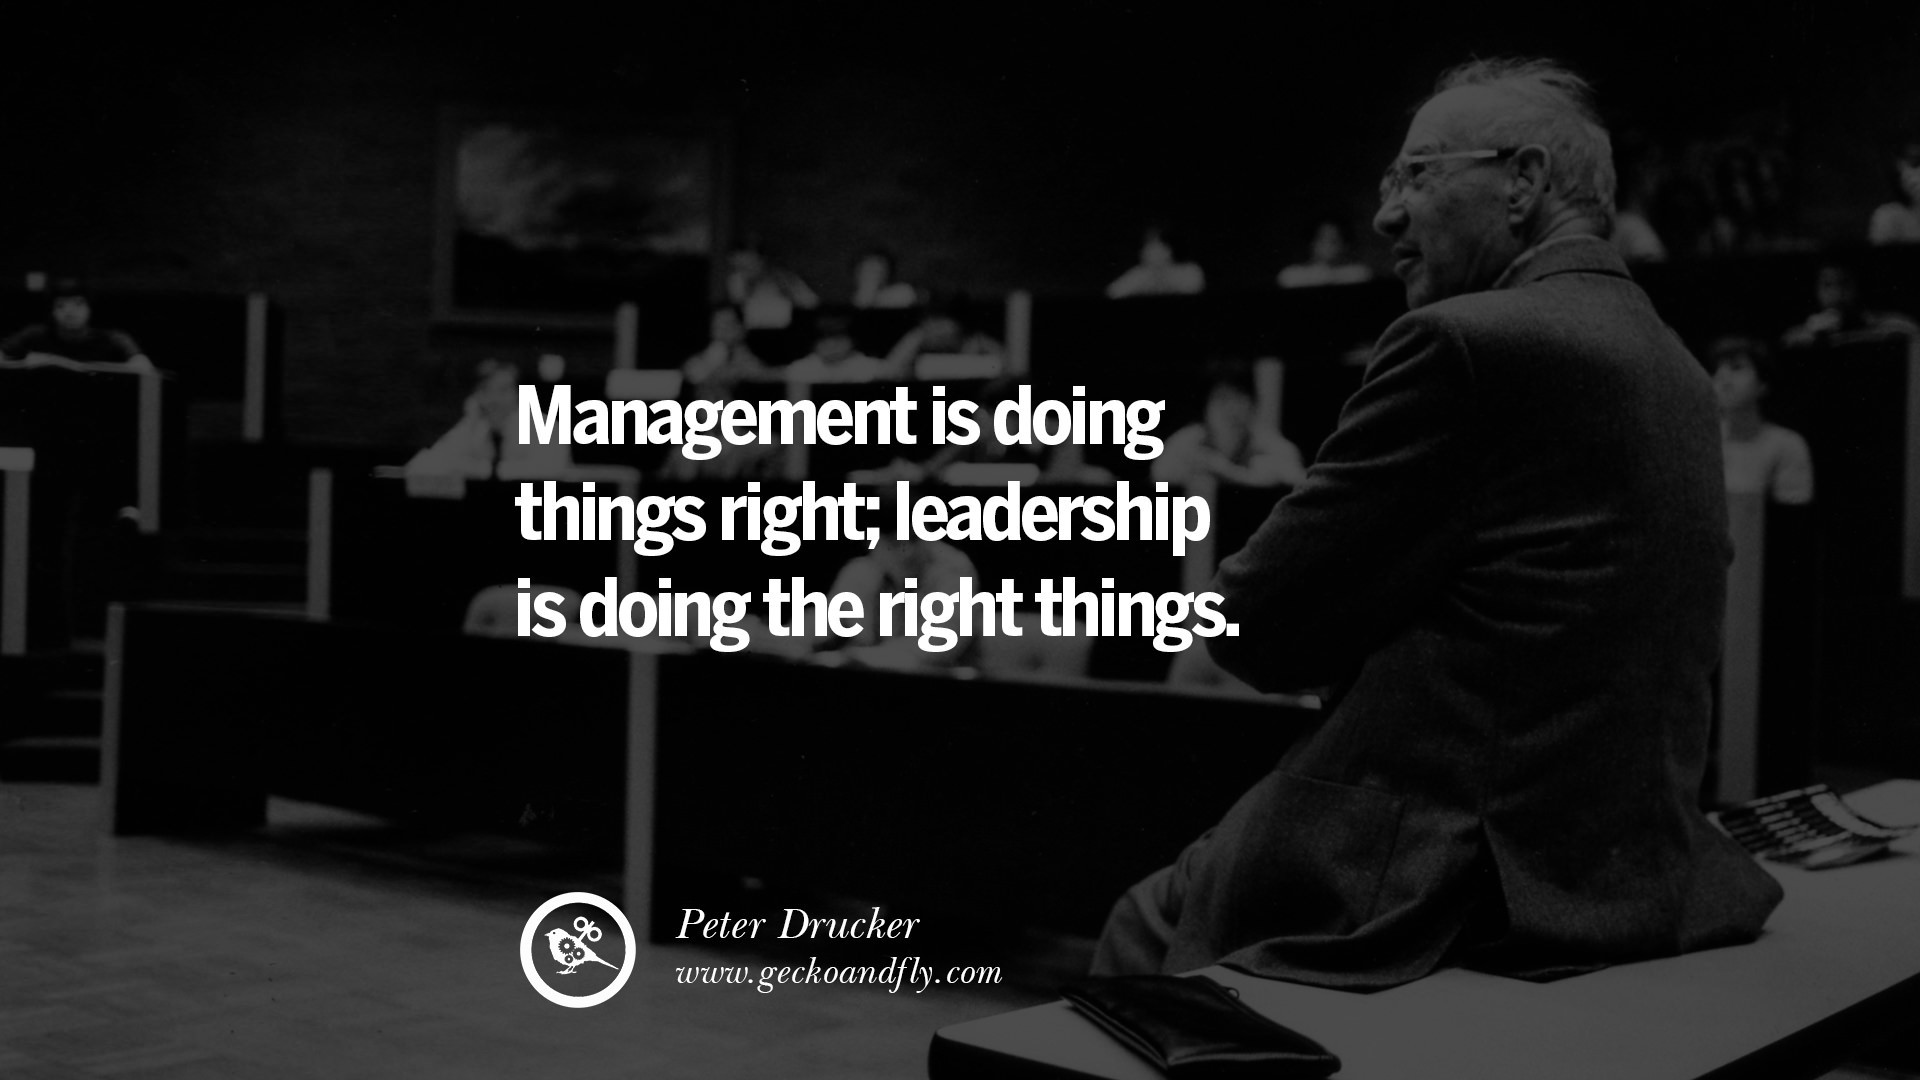 Positive Leadership Quotes
 22 Uplifting and Motivational Quotes on Management Leadership